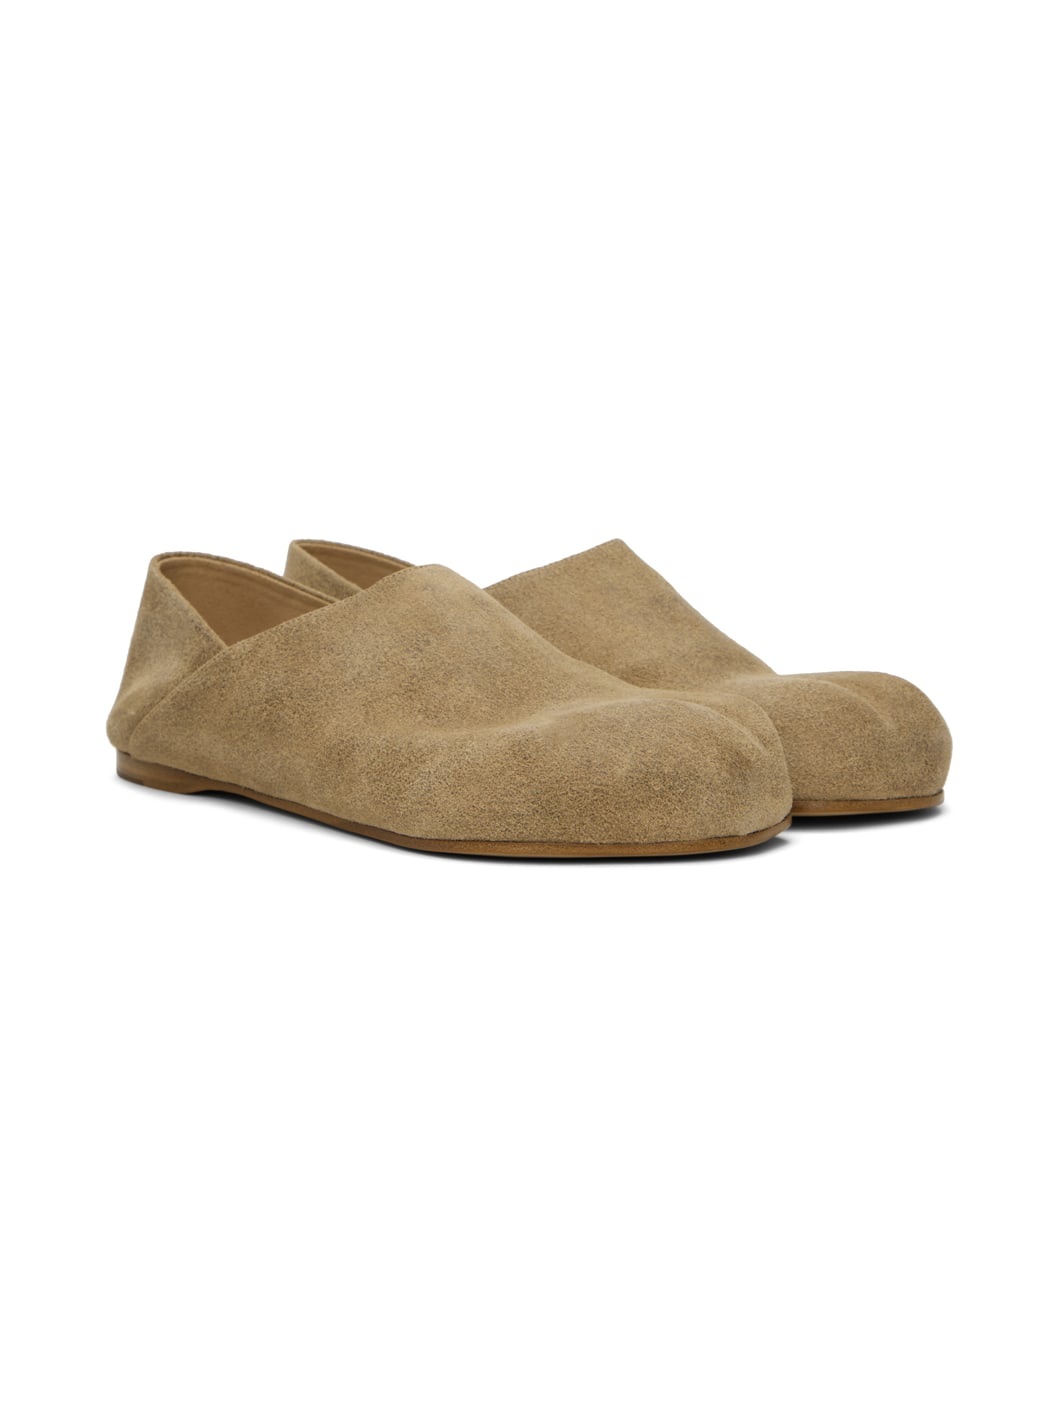 Beige Paw Loafers - 4